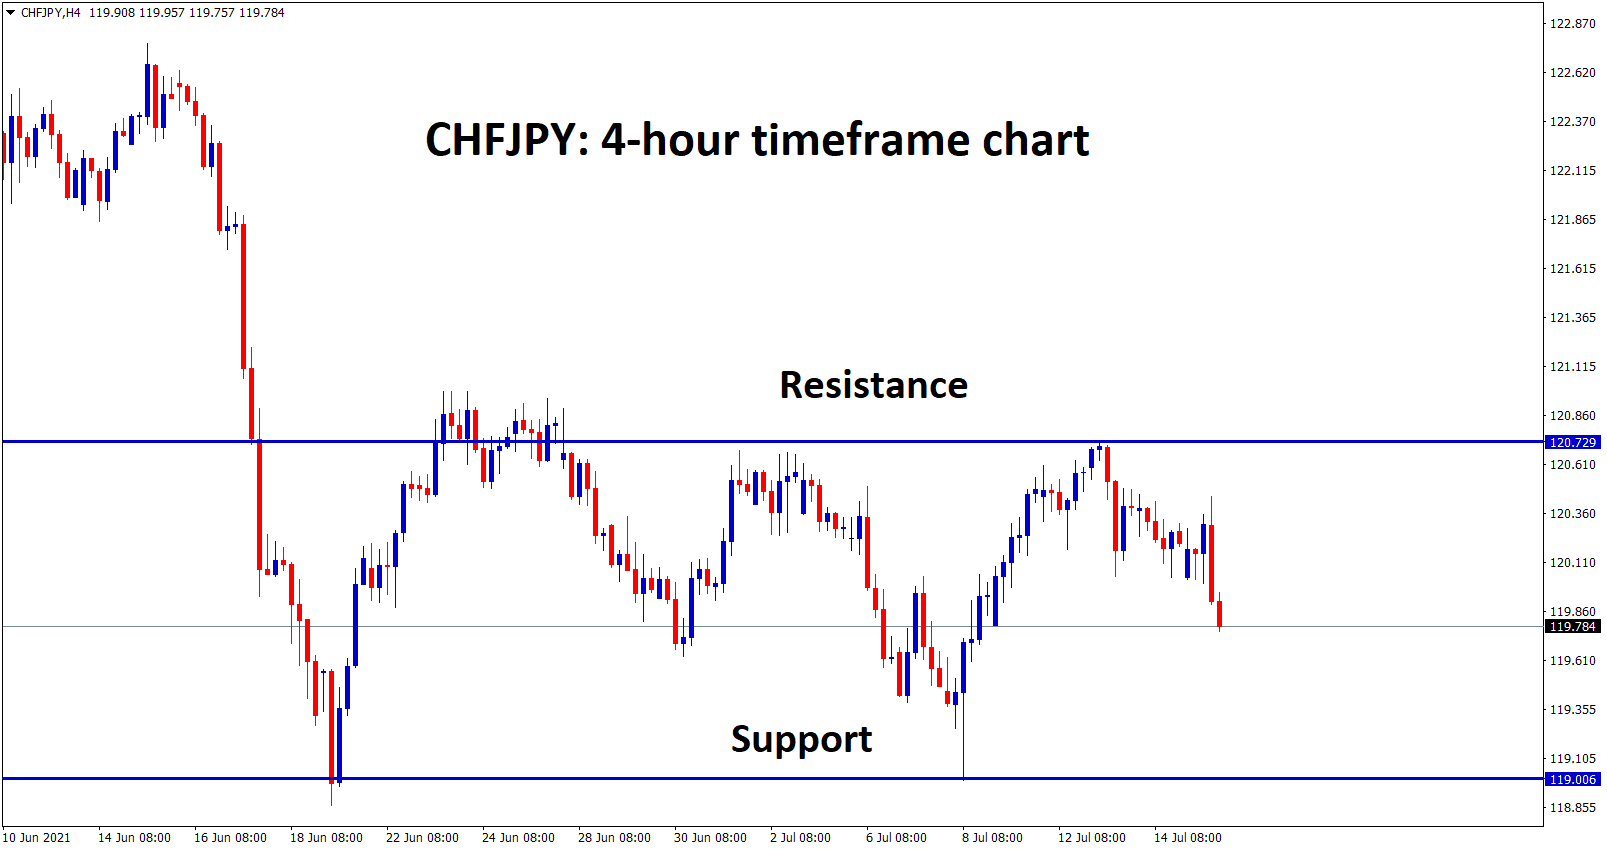 CHFJPY is moving up and down between the resistance and support levels